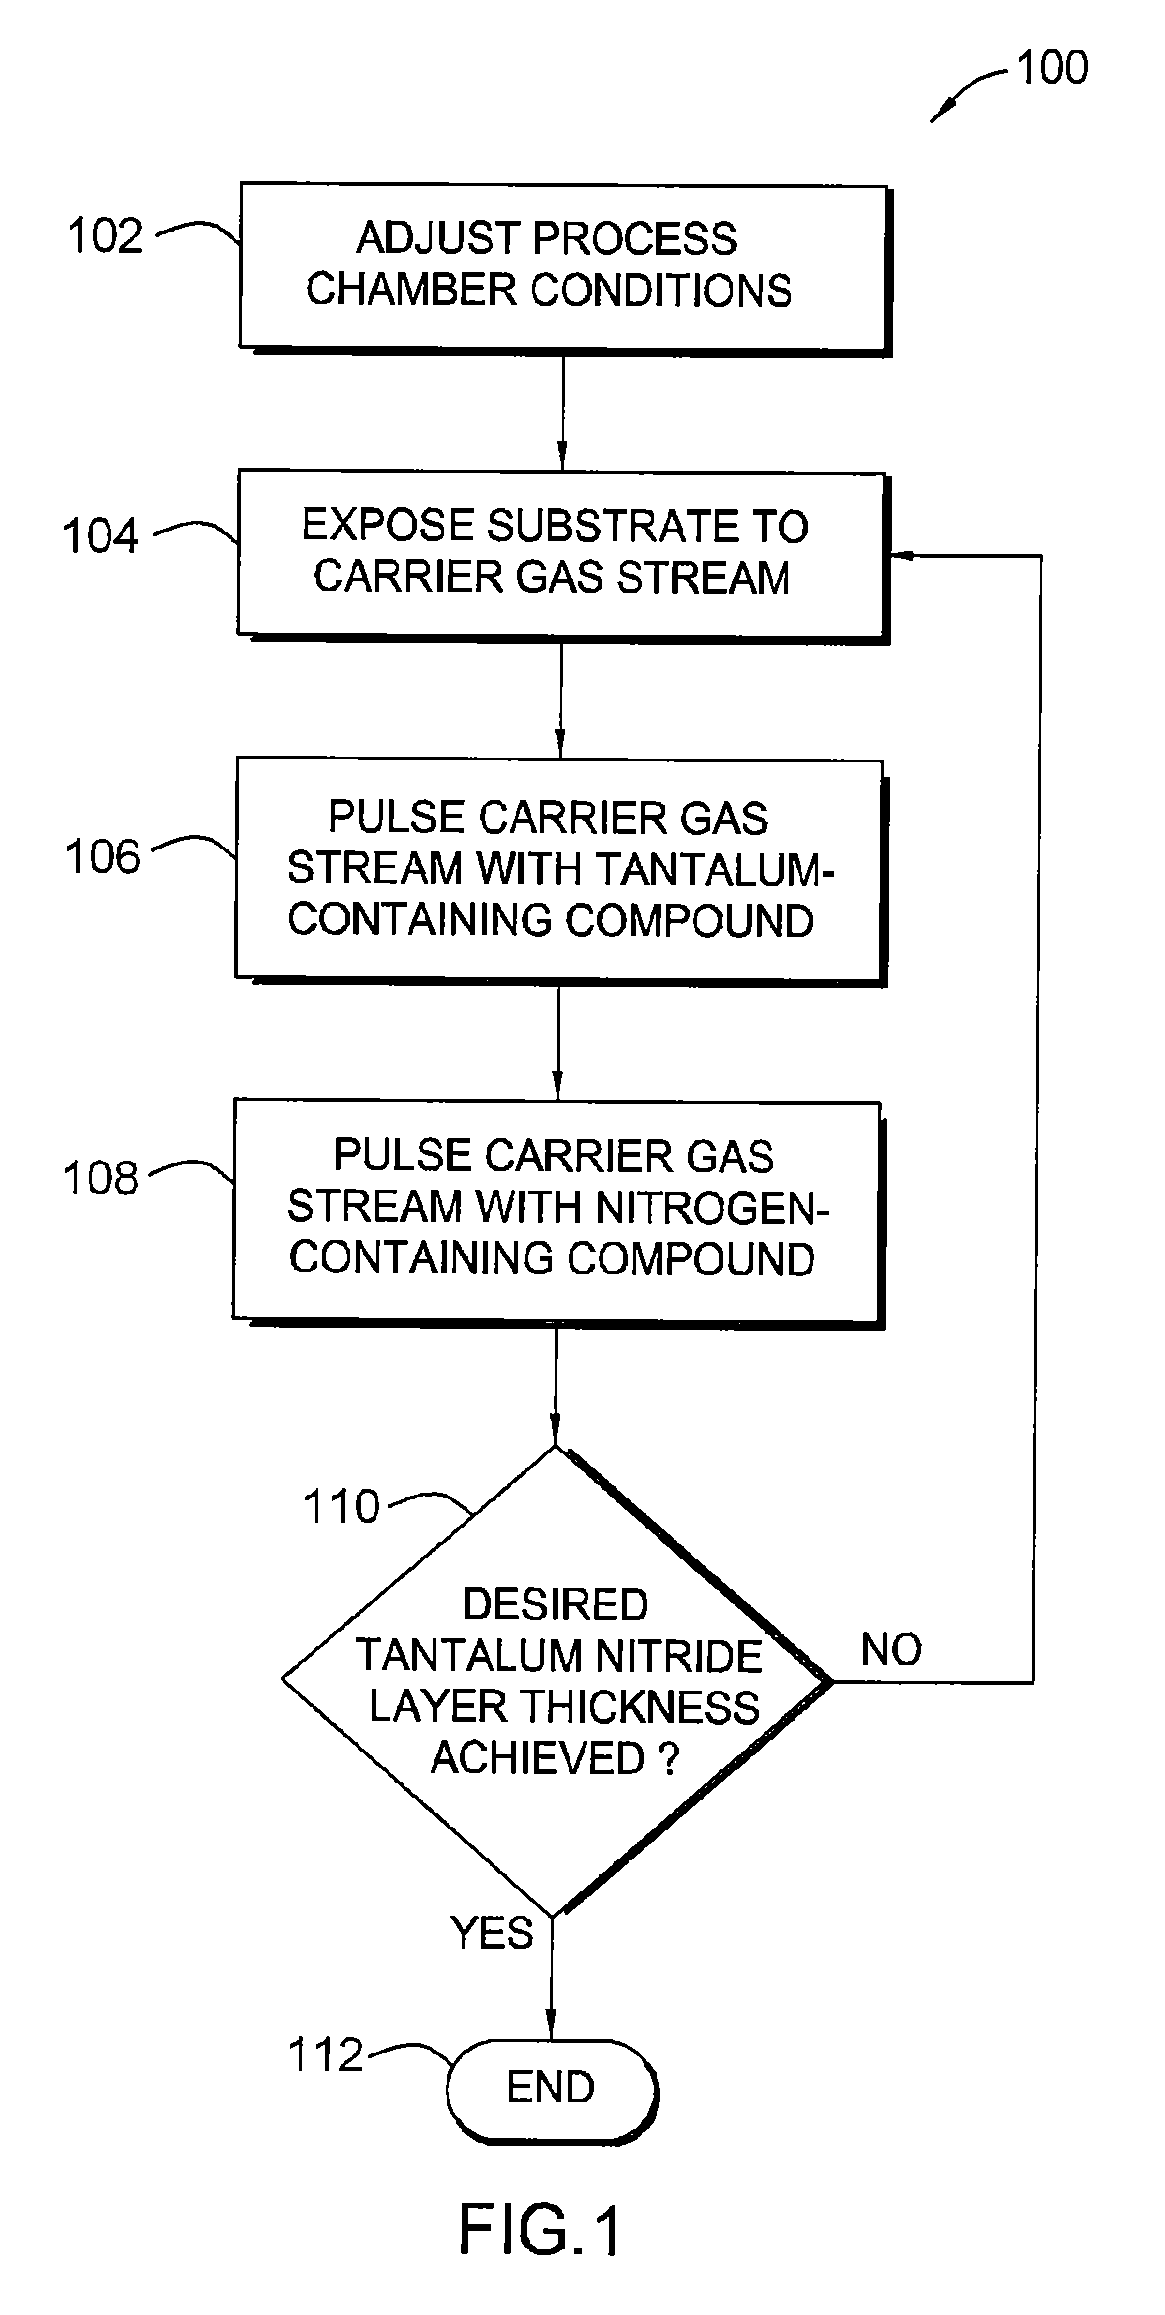 In-situ chamber treatment and deposition process